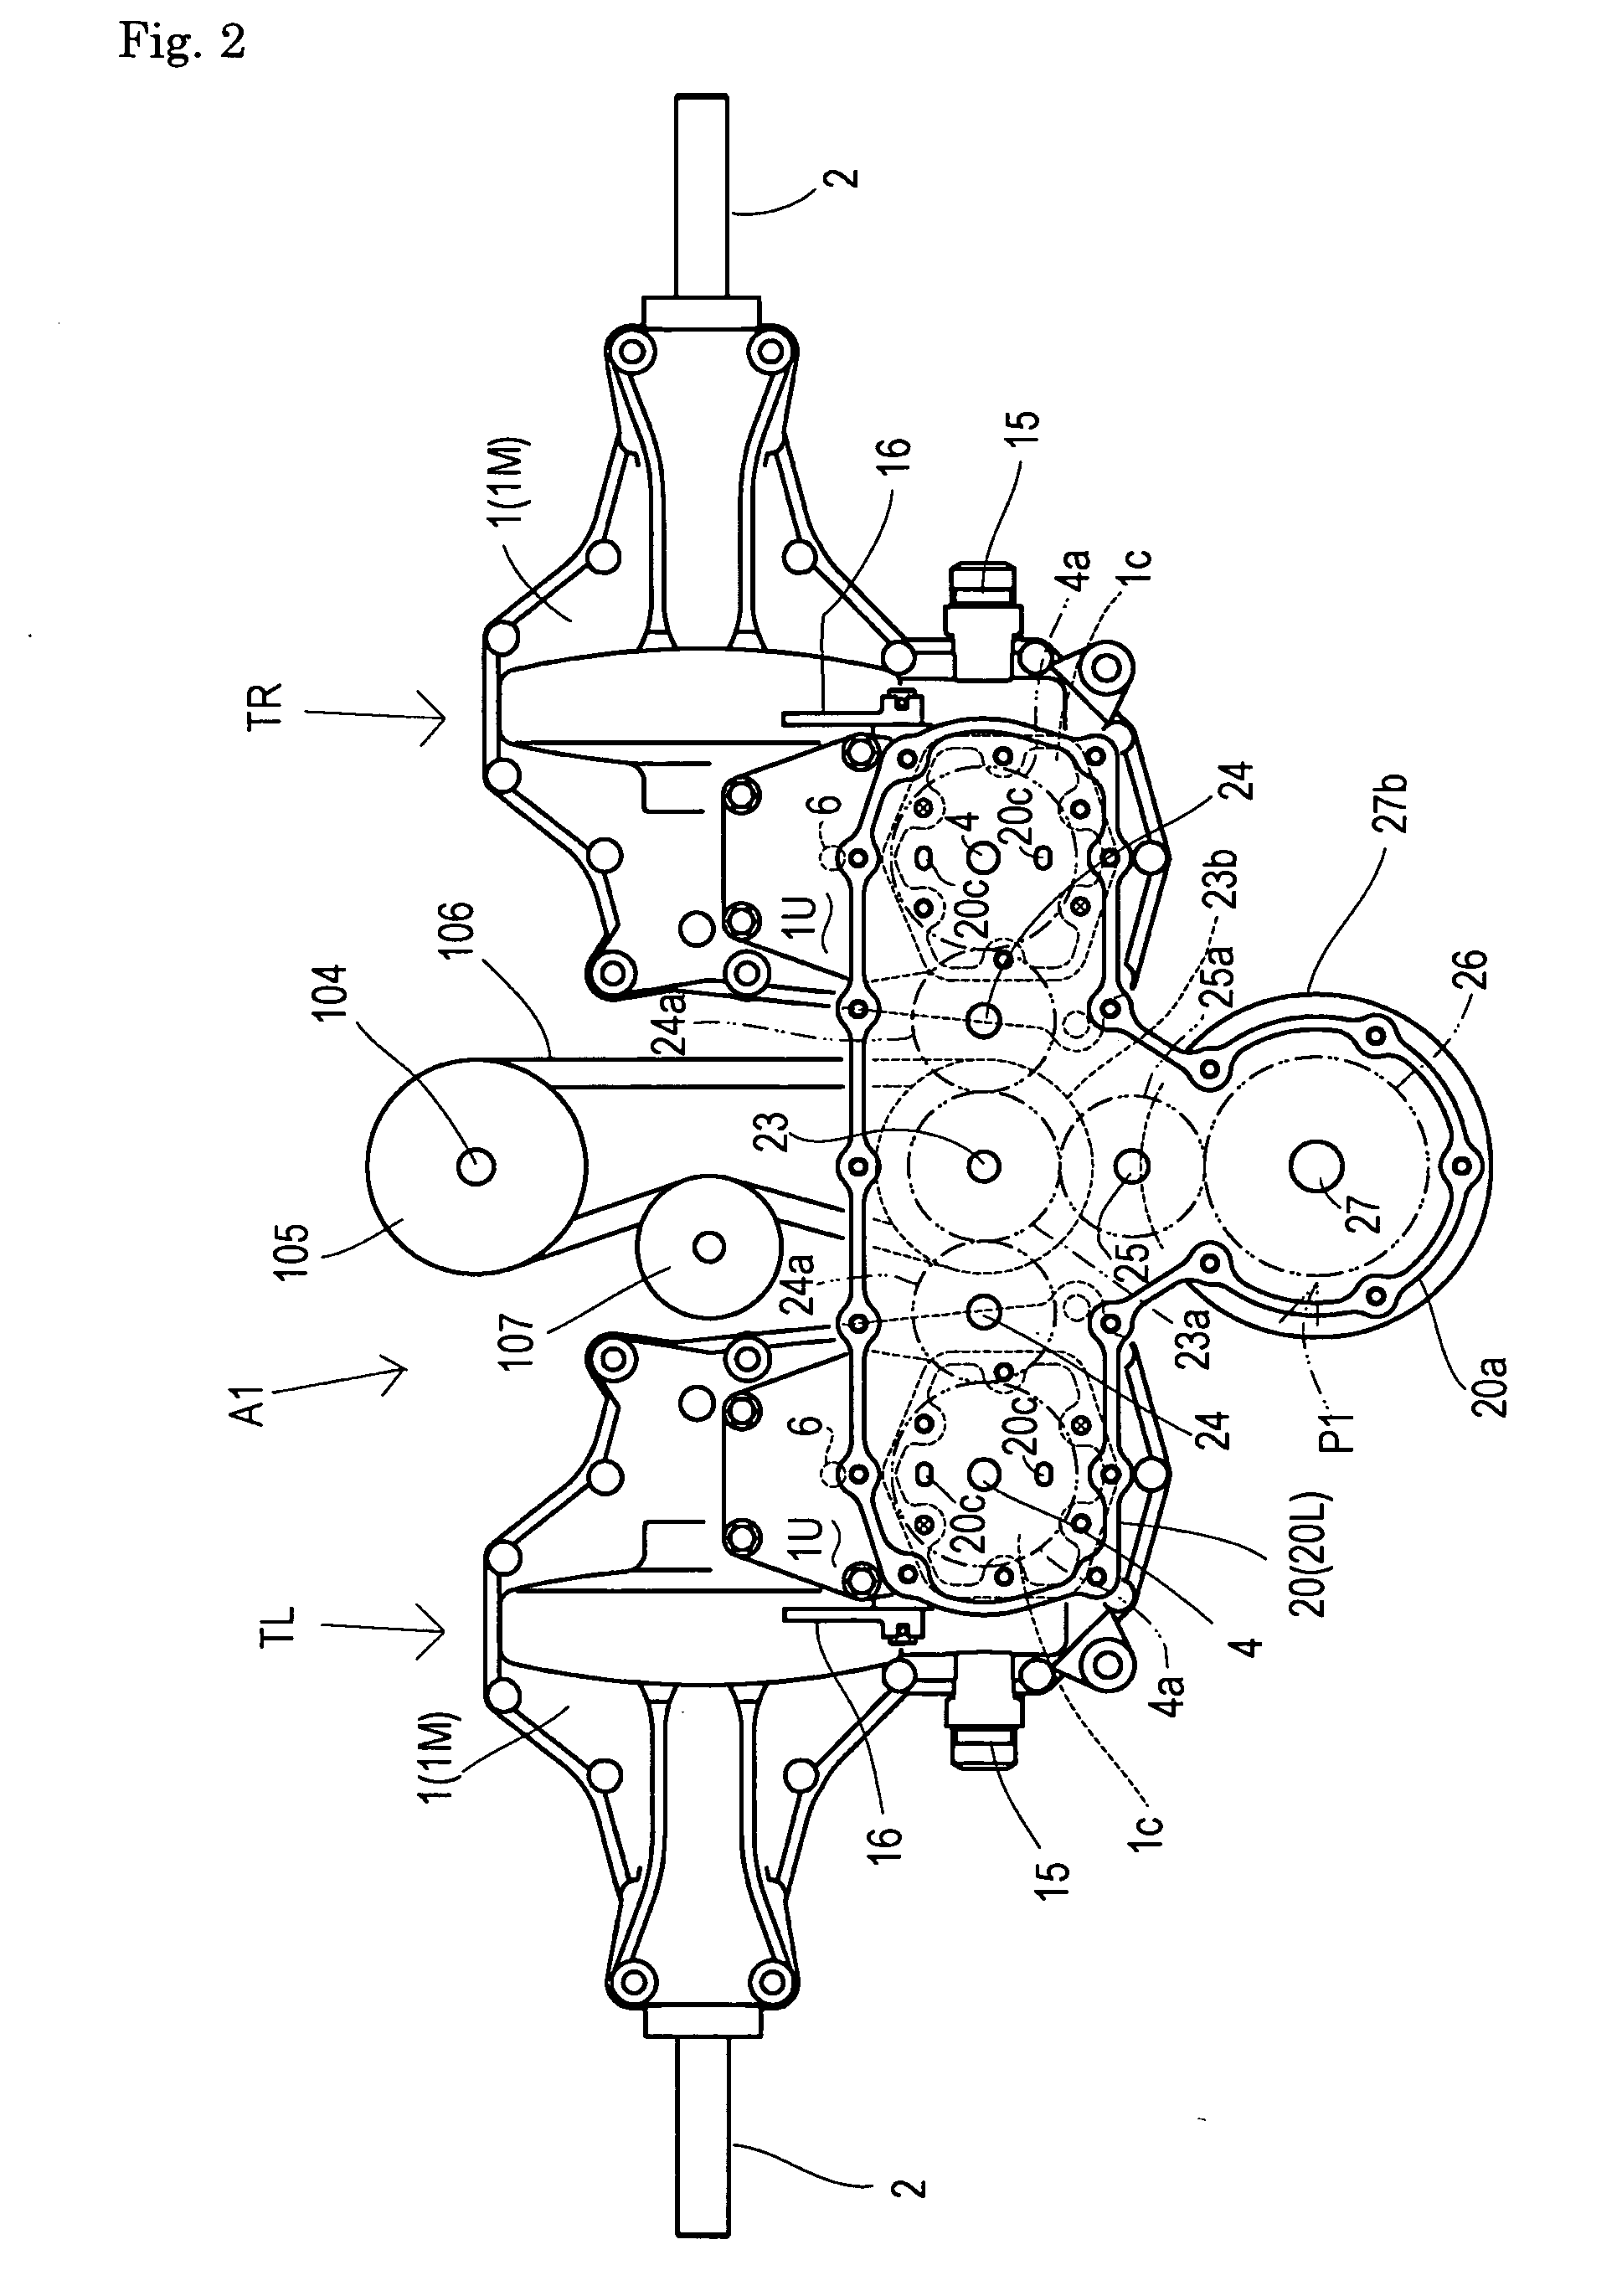 Power transmission apparatus for working vehicle